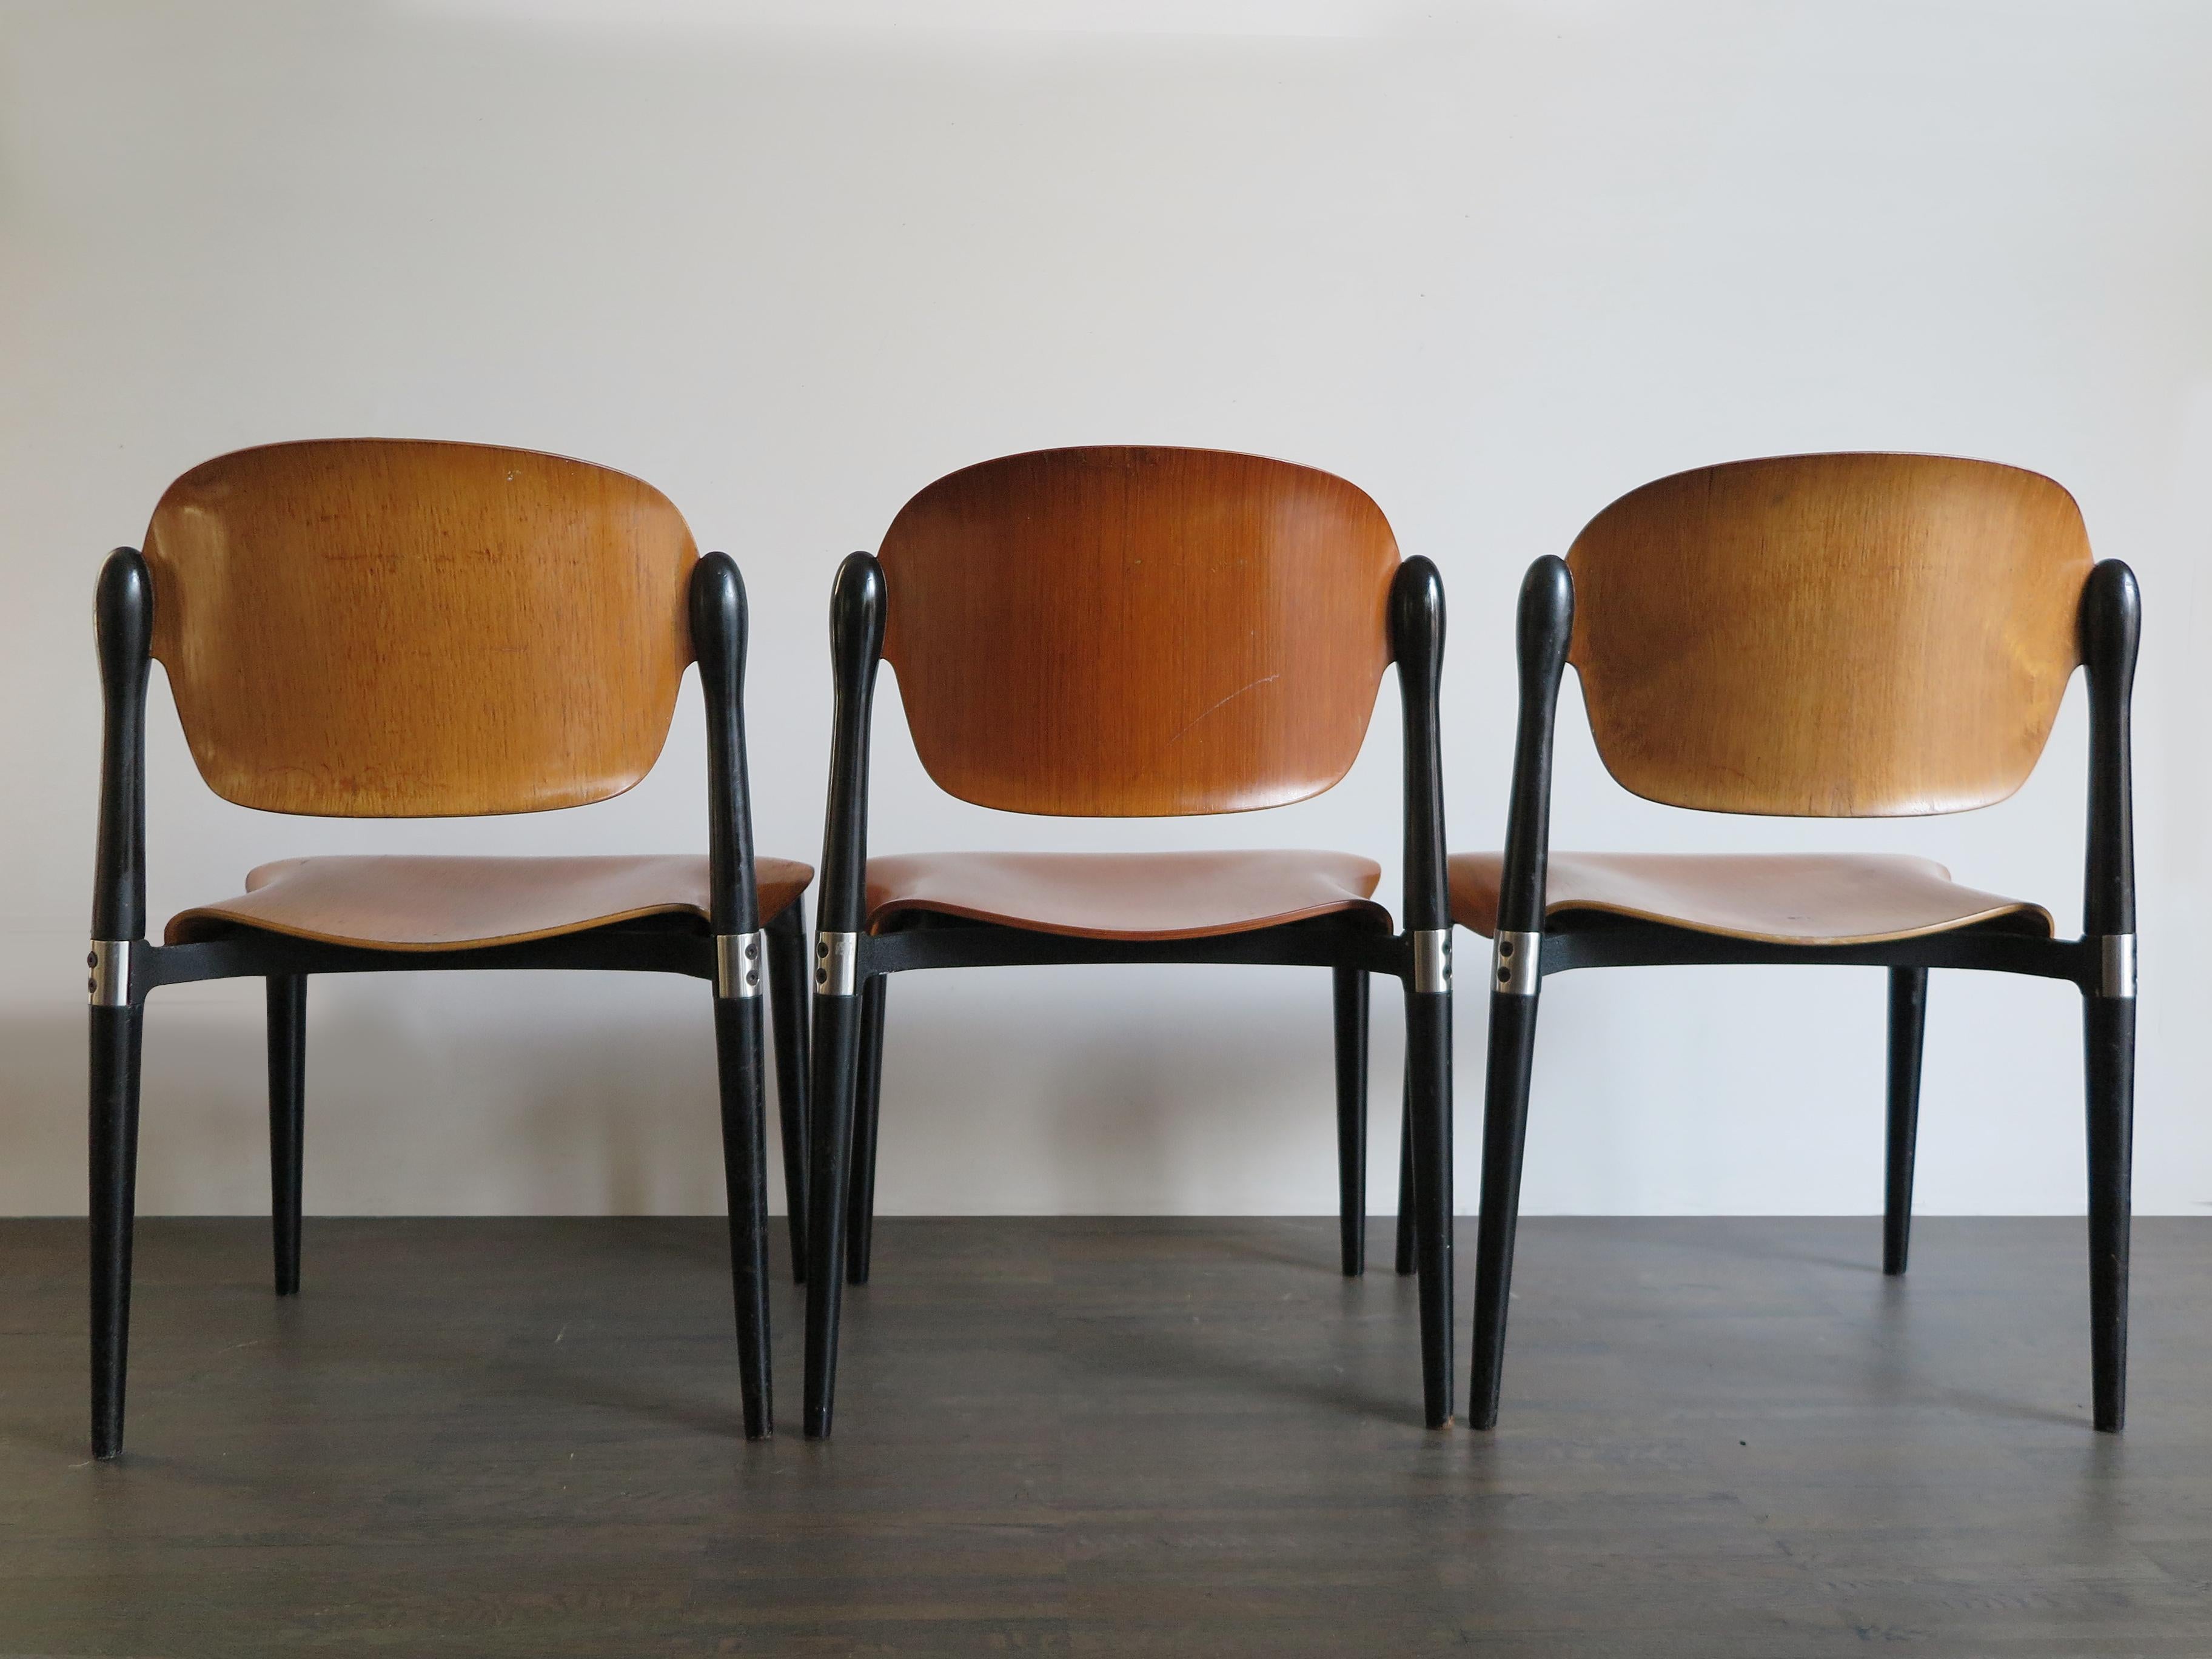 Metal Eugenio Gerli for Tecno Italian Curved Wood Dining Chairs Model “S832”, 1962